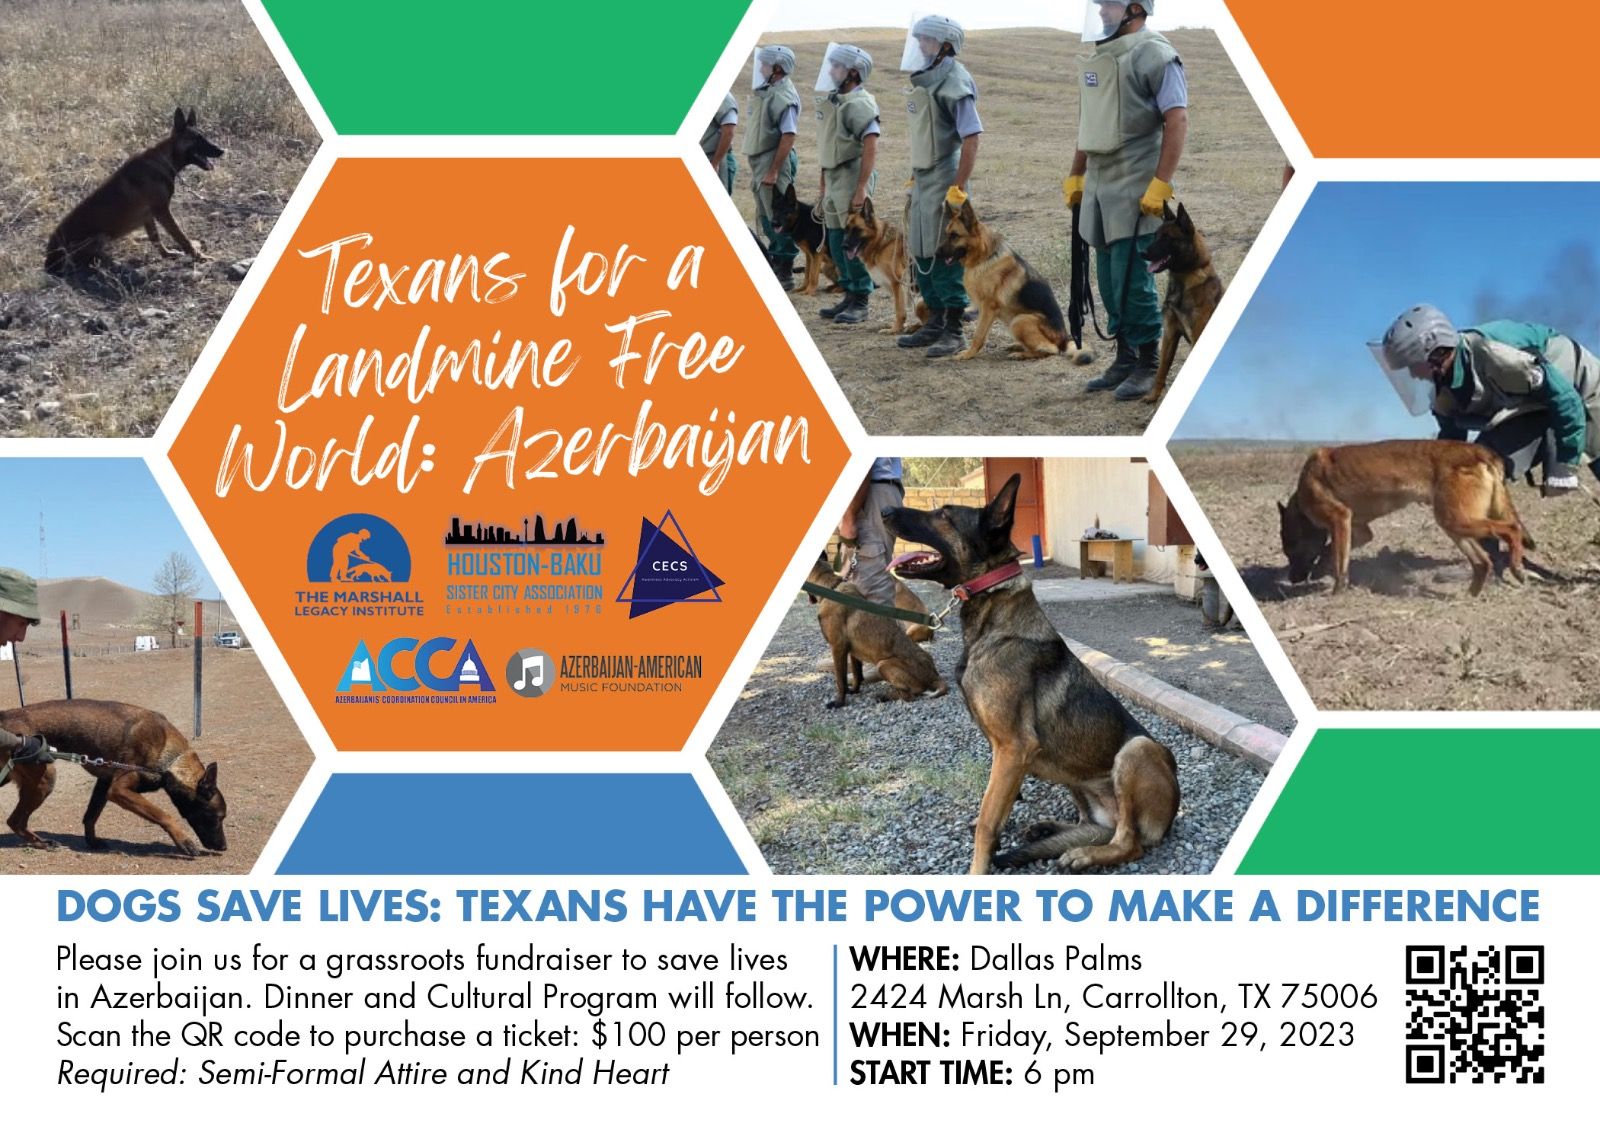 A support campaign for Azerbaijan will be held in Dallas, USA, regarding the threat of landmines